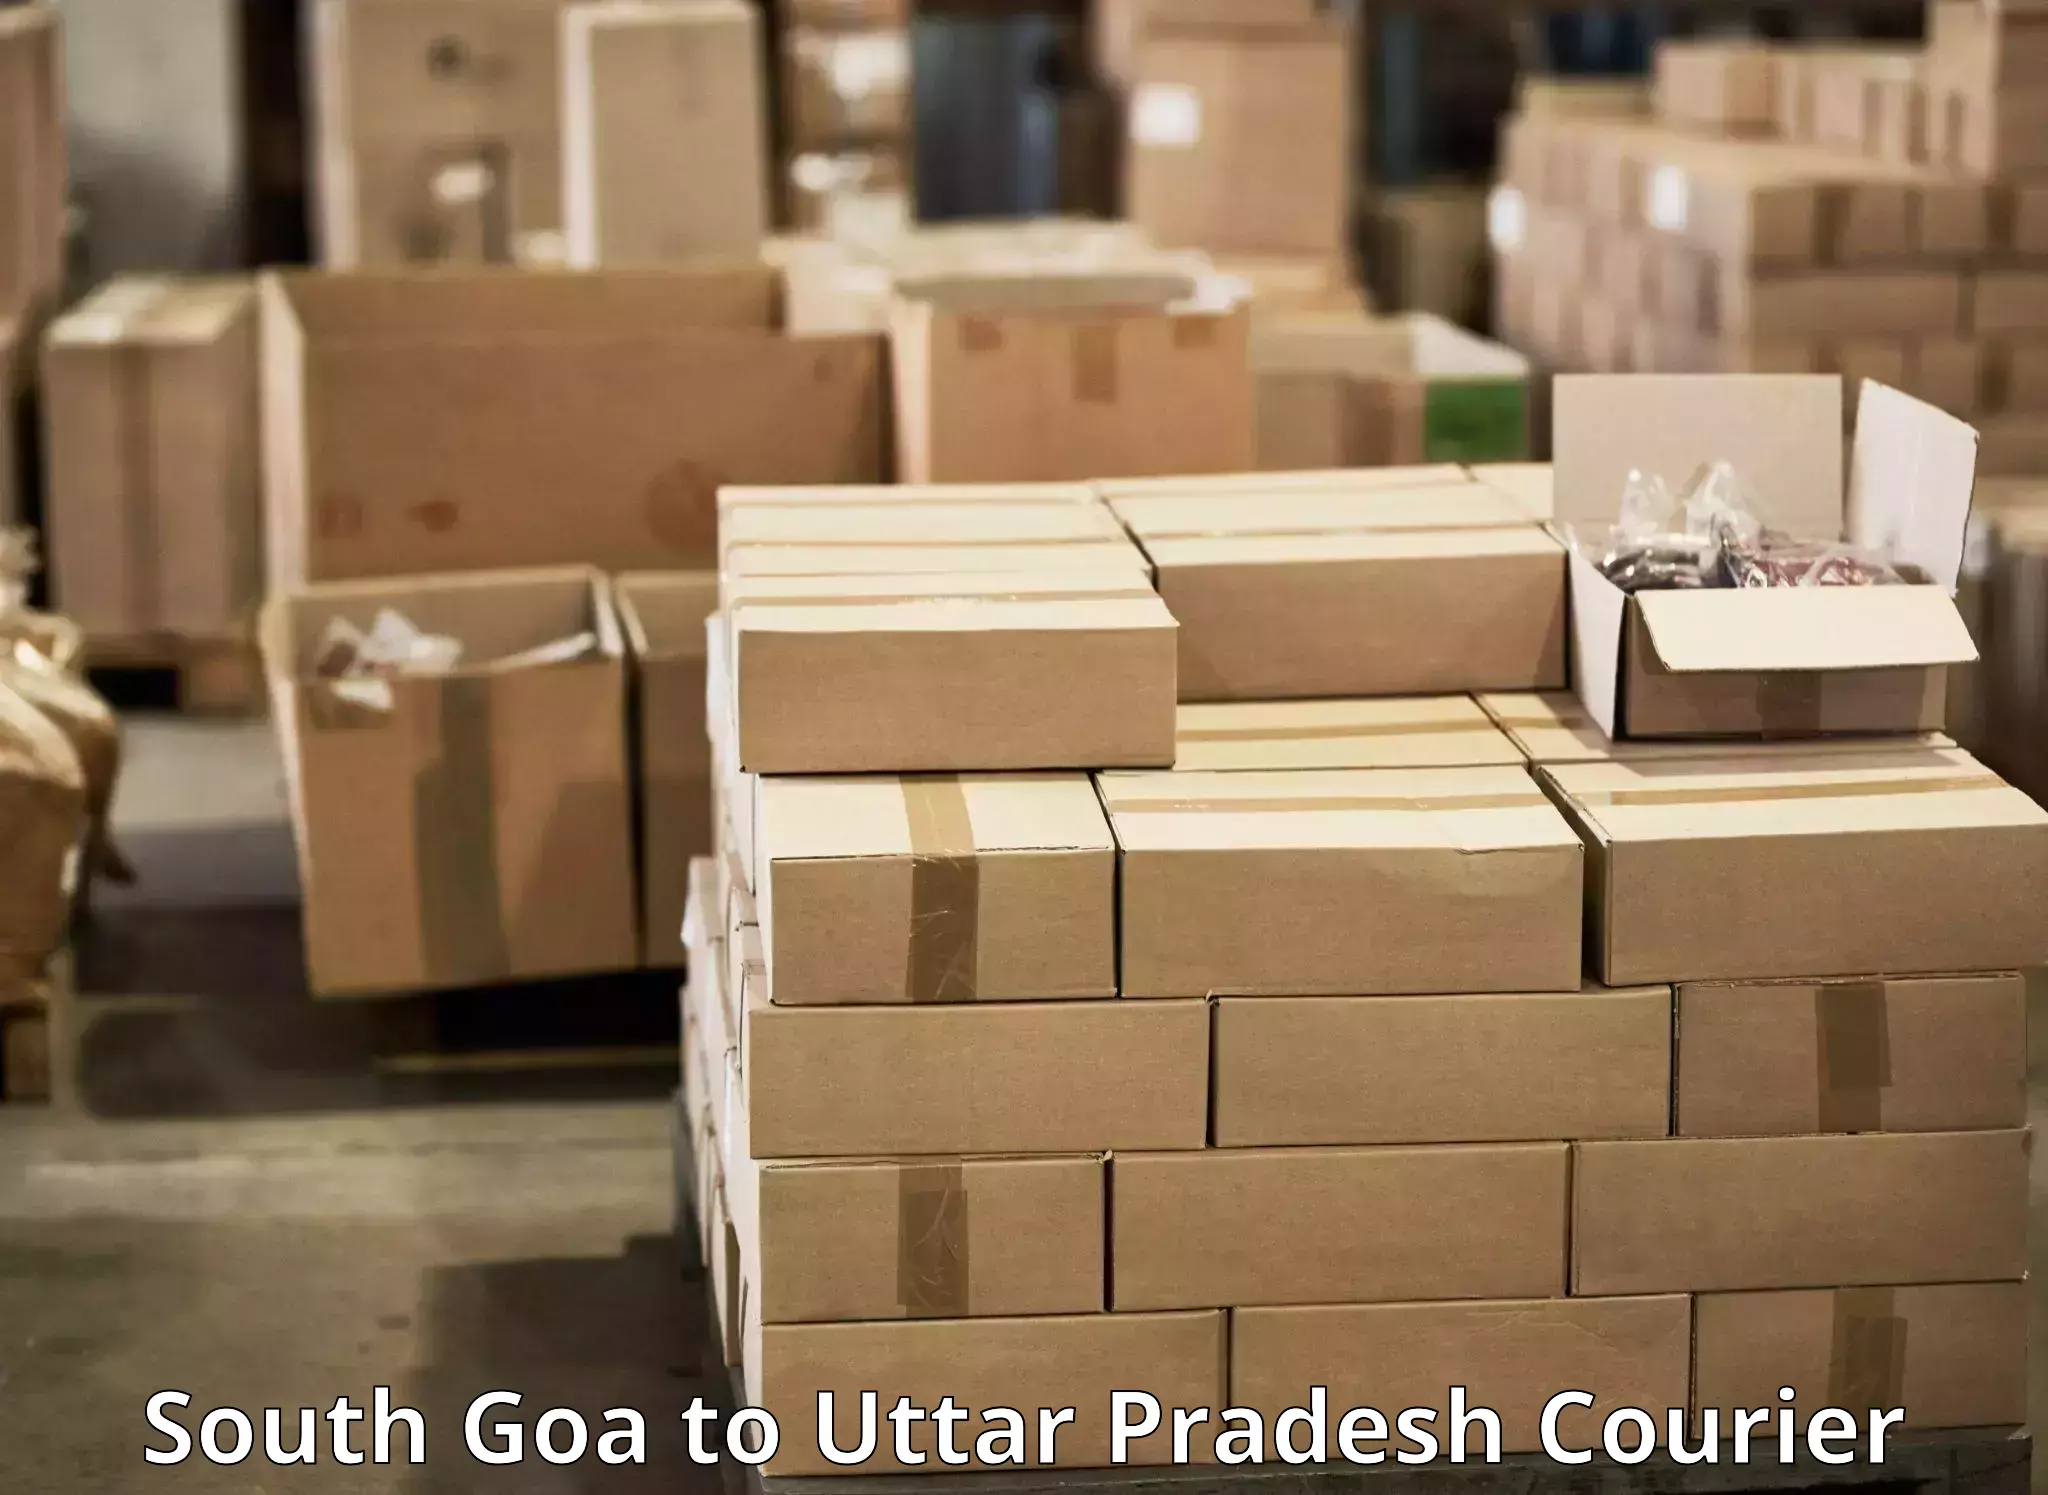 Package delivery network South Goa to Poonchh